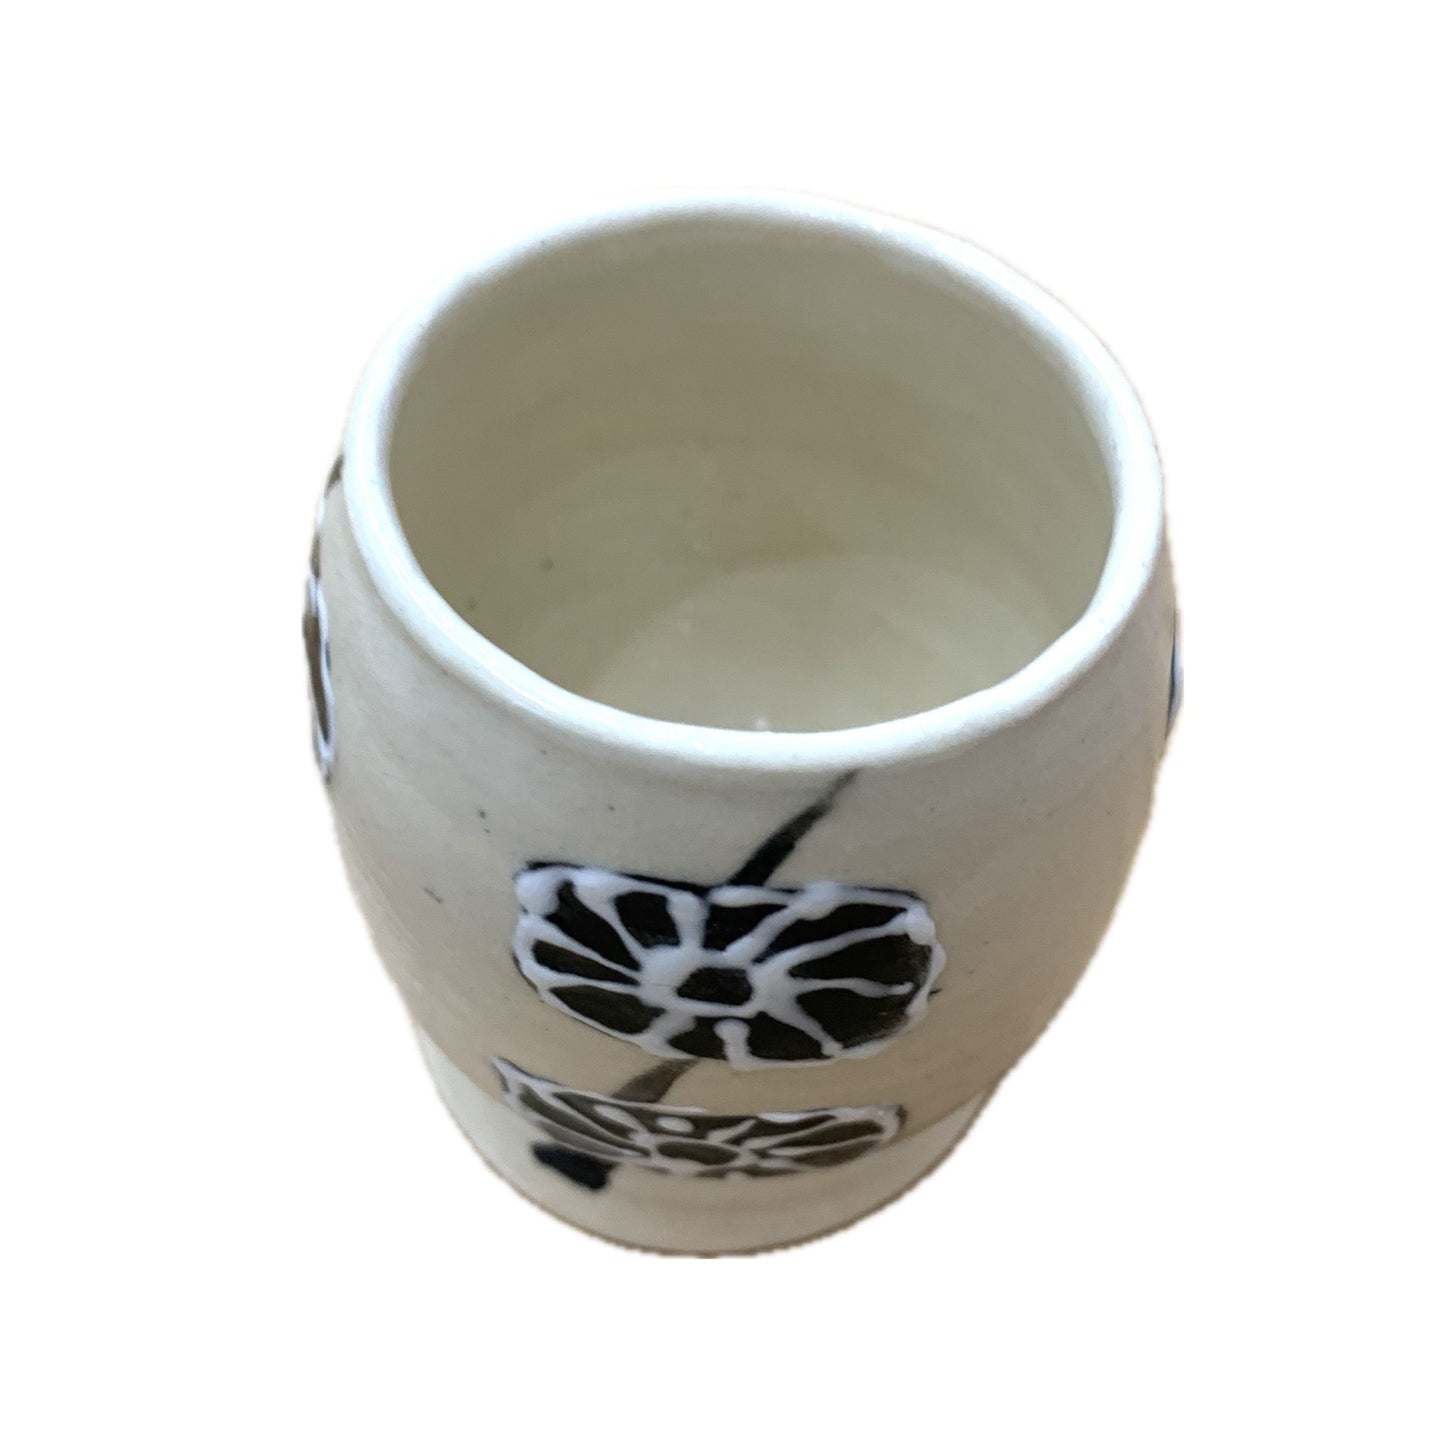 A&A POTTERY - AKIKO - Hand Drawn Flower Small Vase/ Egg Cup- Outline